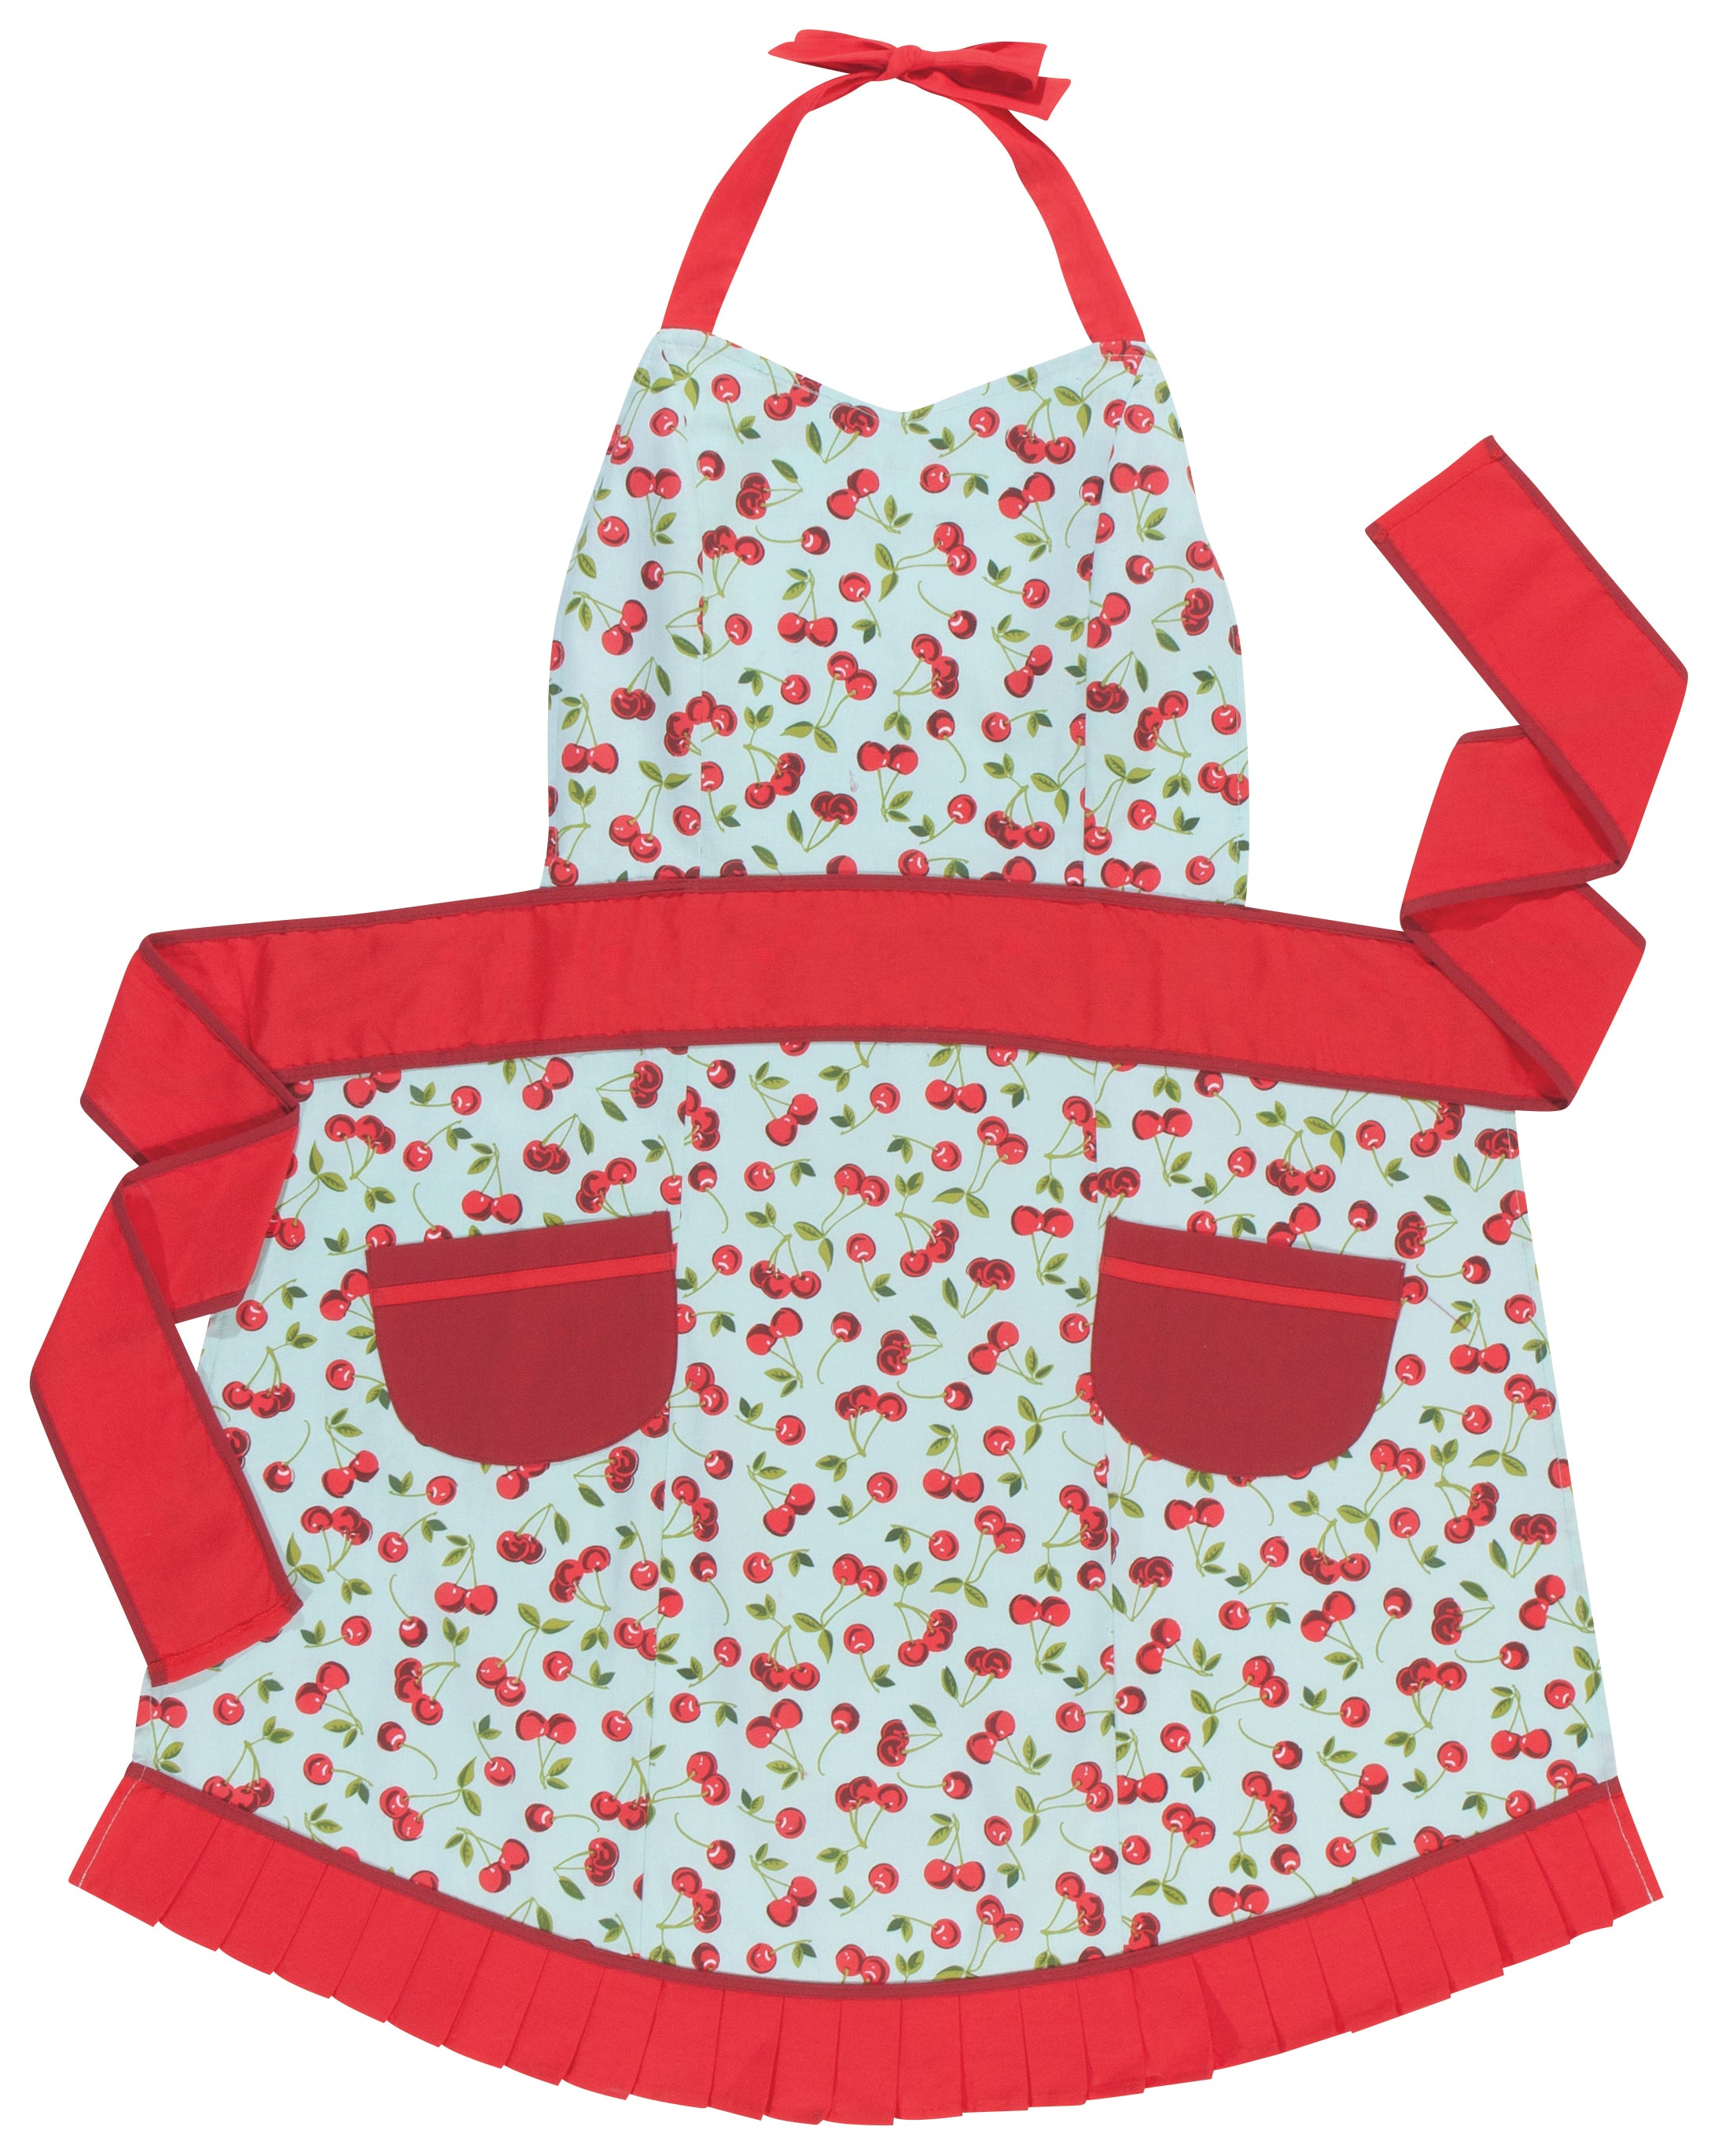 full view of an off-white apron with bunches of cherries printed on it 